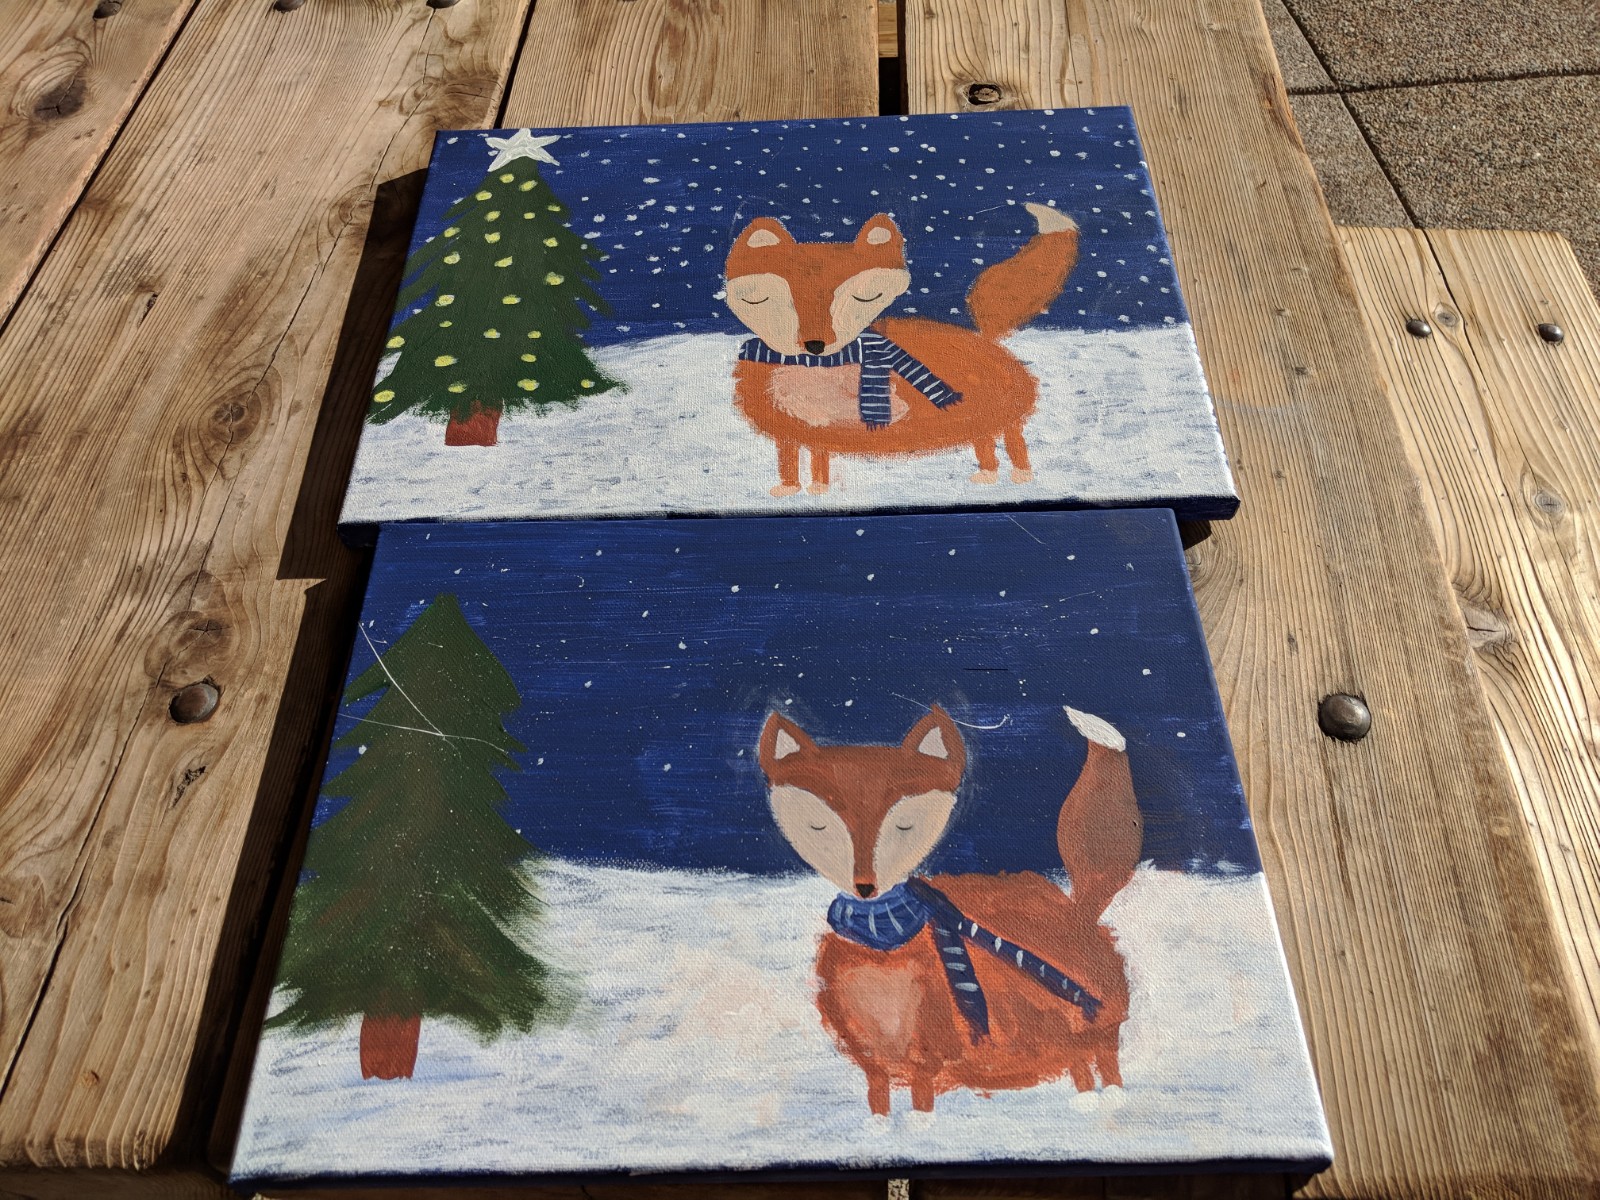 Two paintings of foxes in the snow